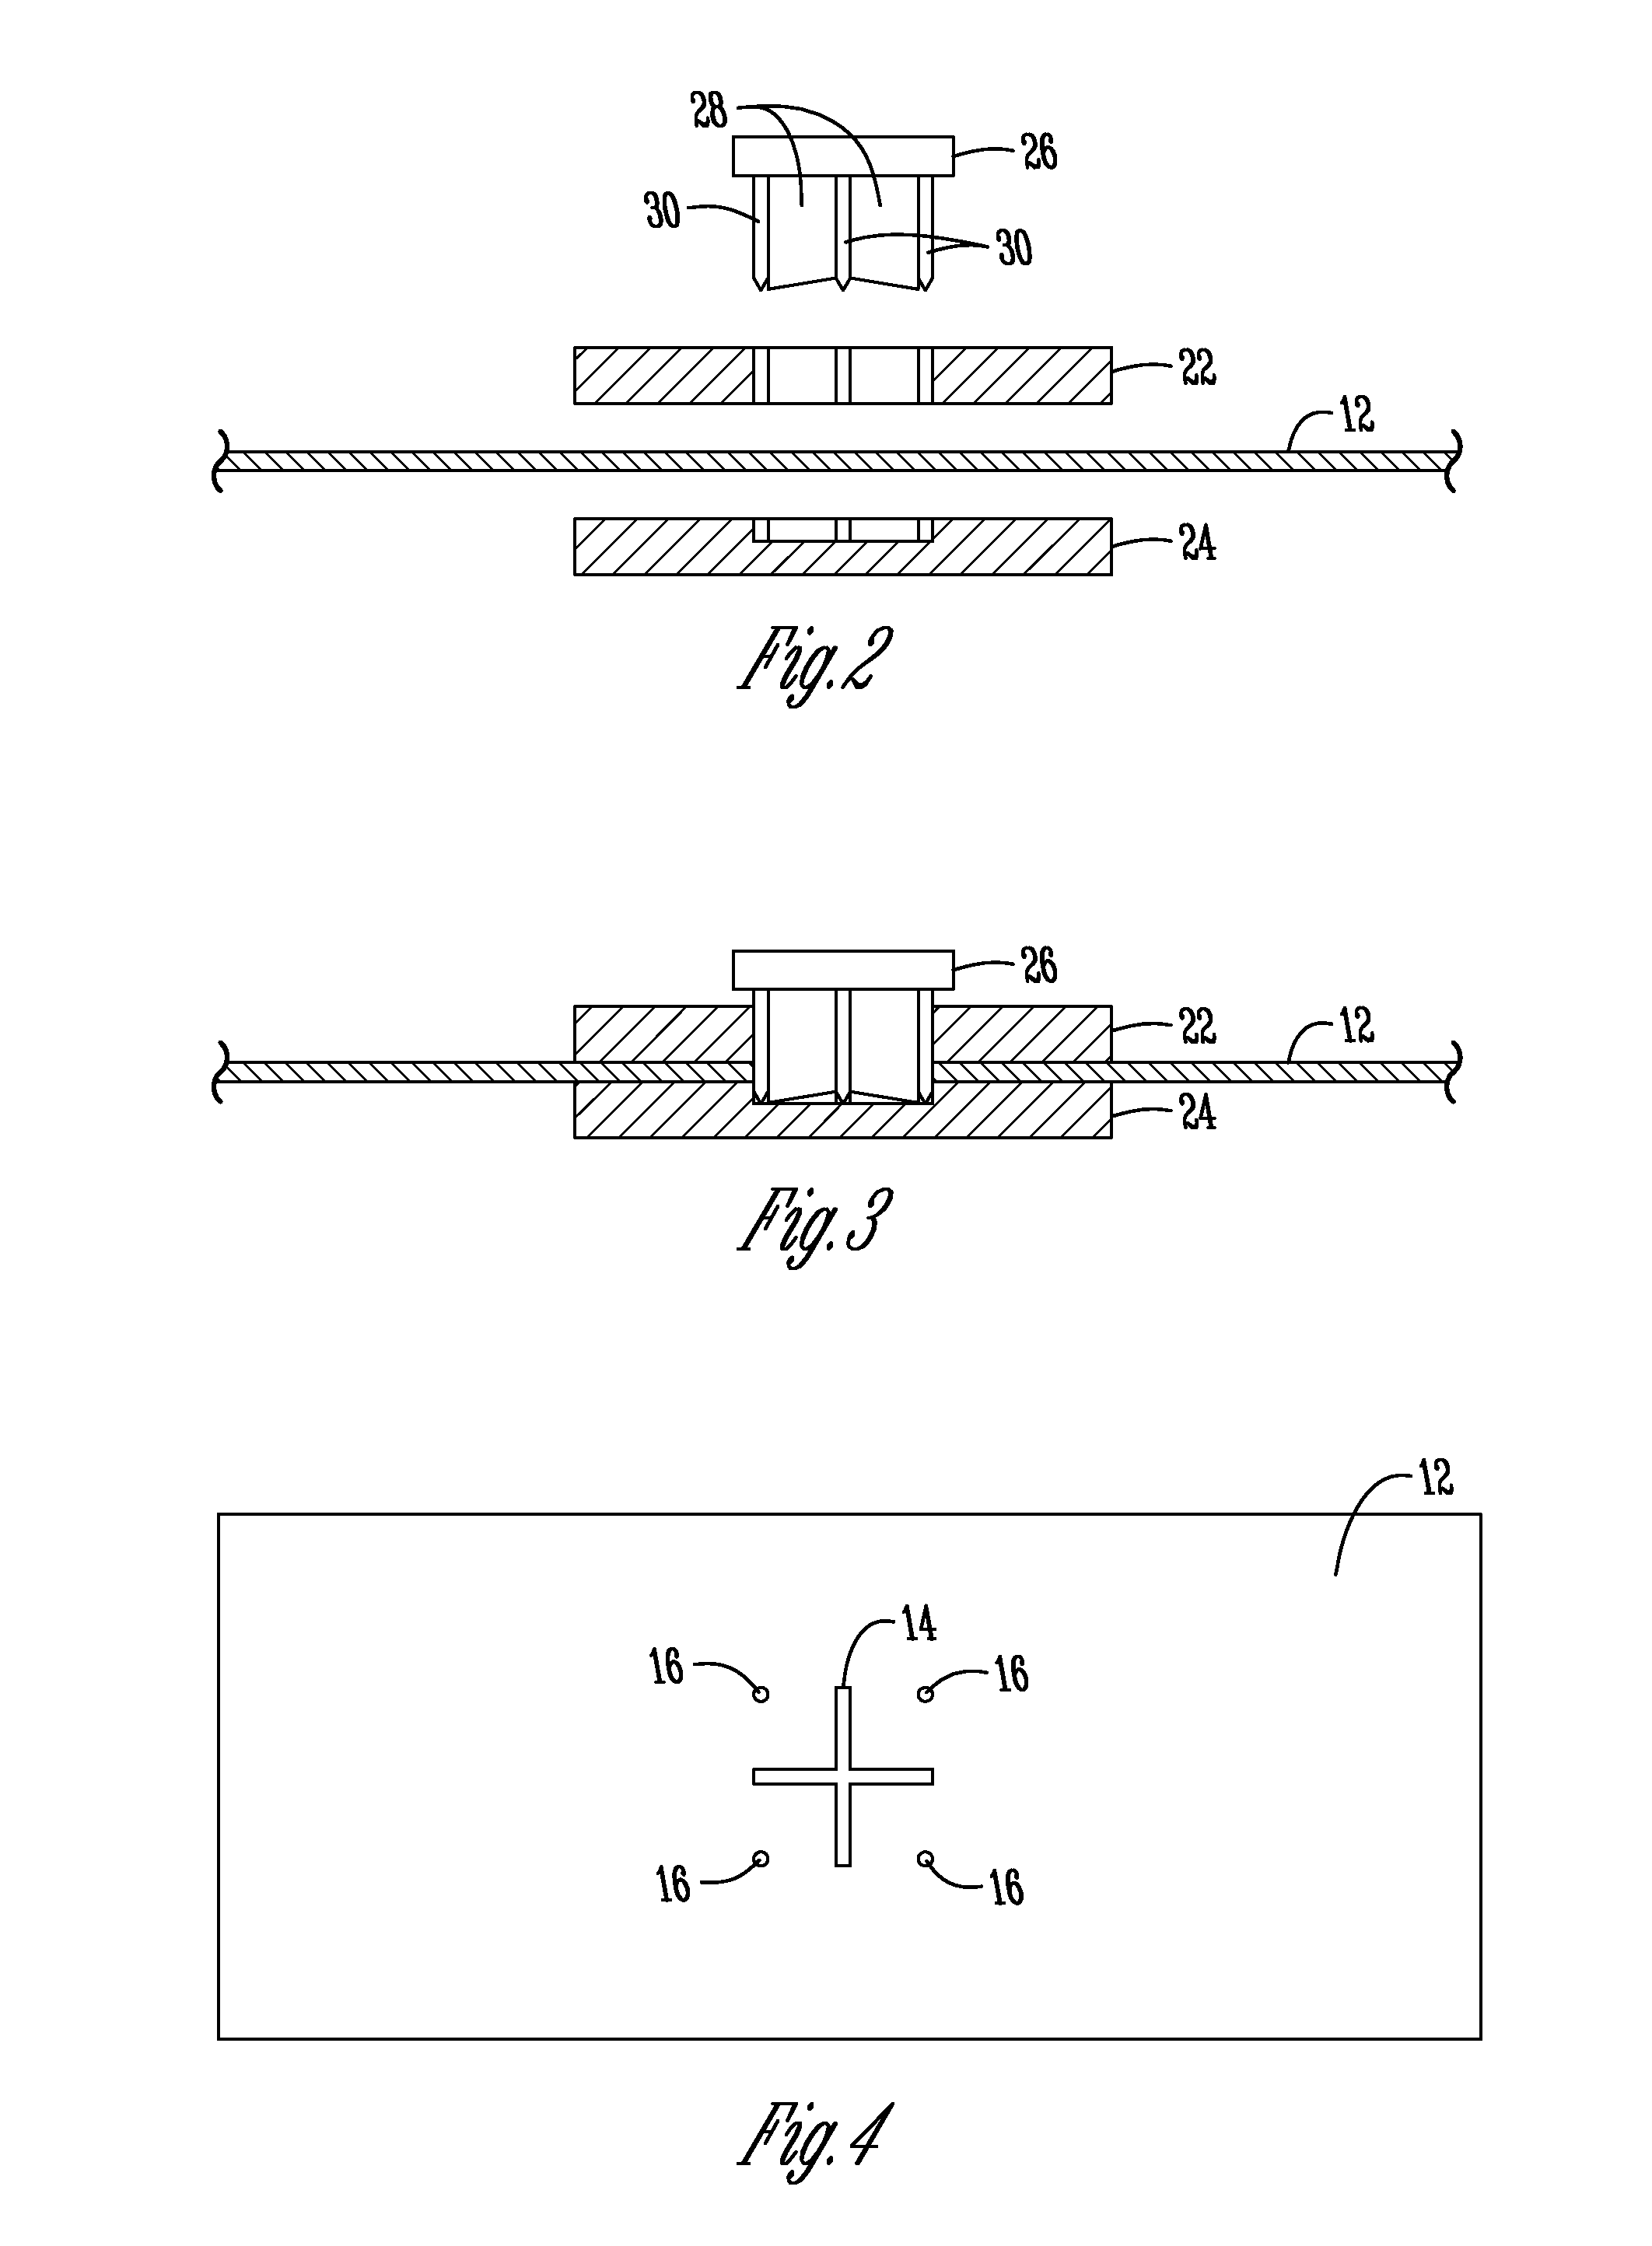 Method and apparatus for embedding ornamental objects into sheet material